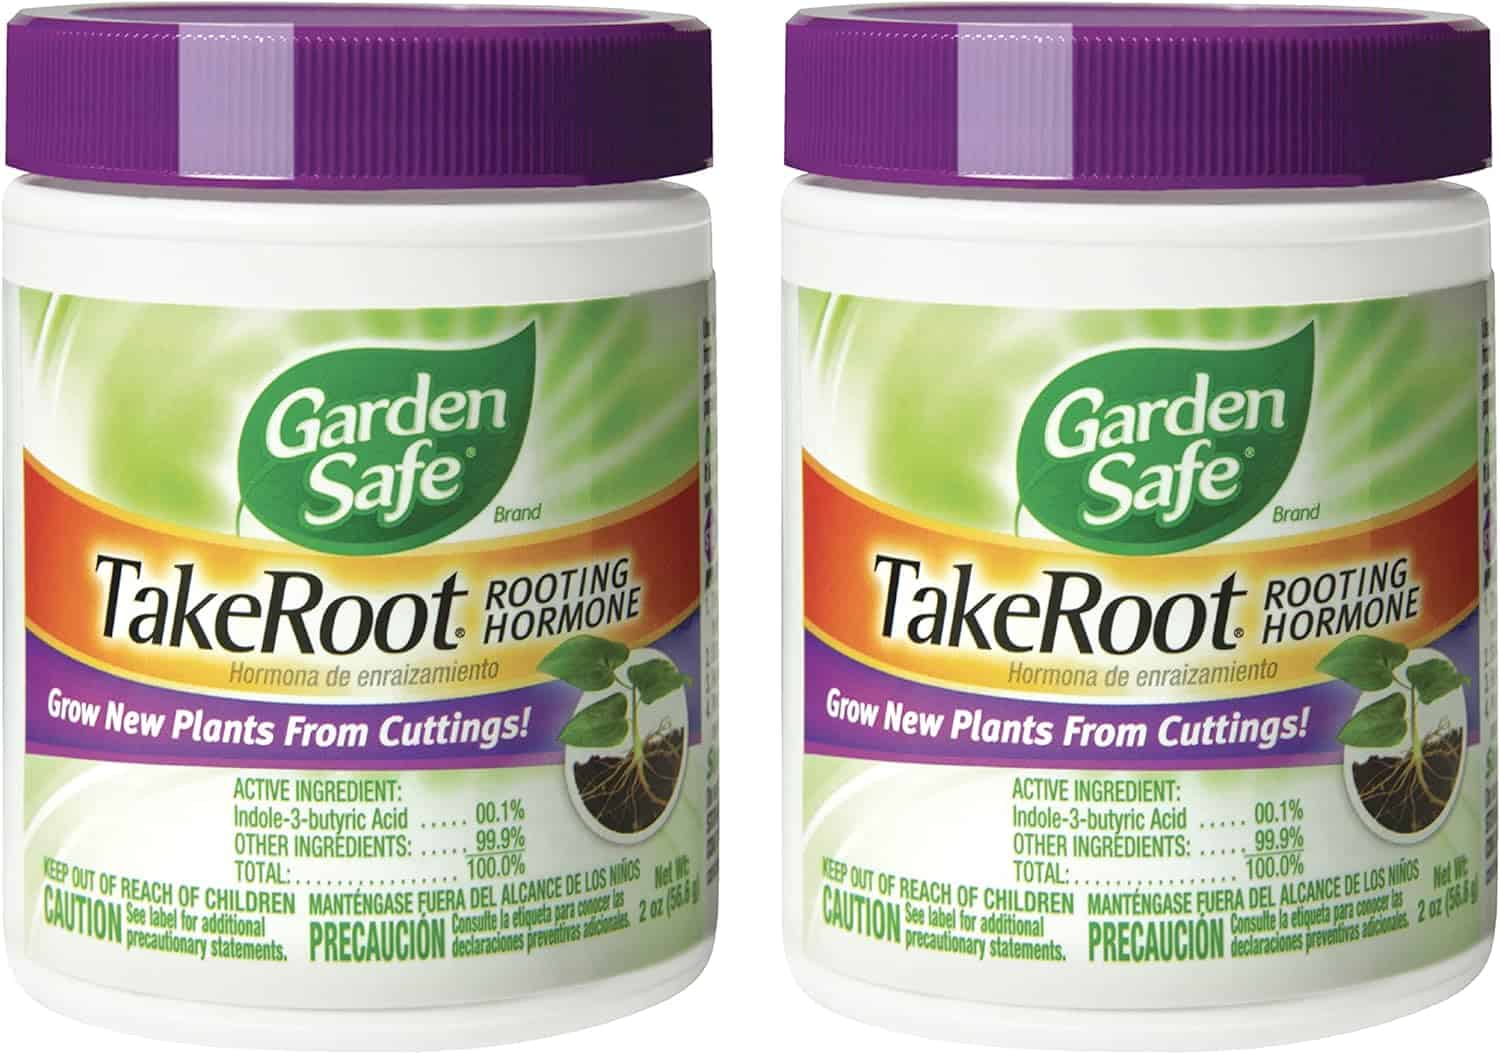 Garden Safe Brand TakeRoot Rooting Hormone, Helps New Plants grow from Cuttings, 2 Ounces, 2 Pack